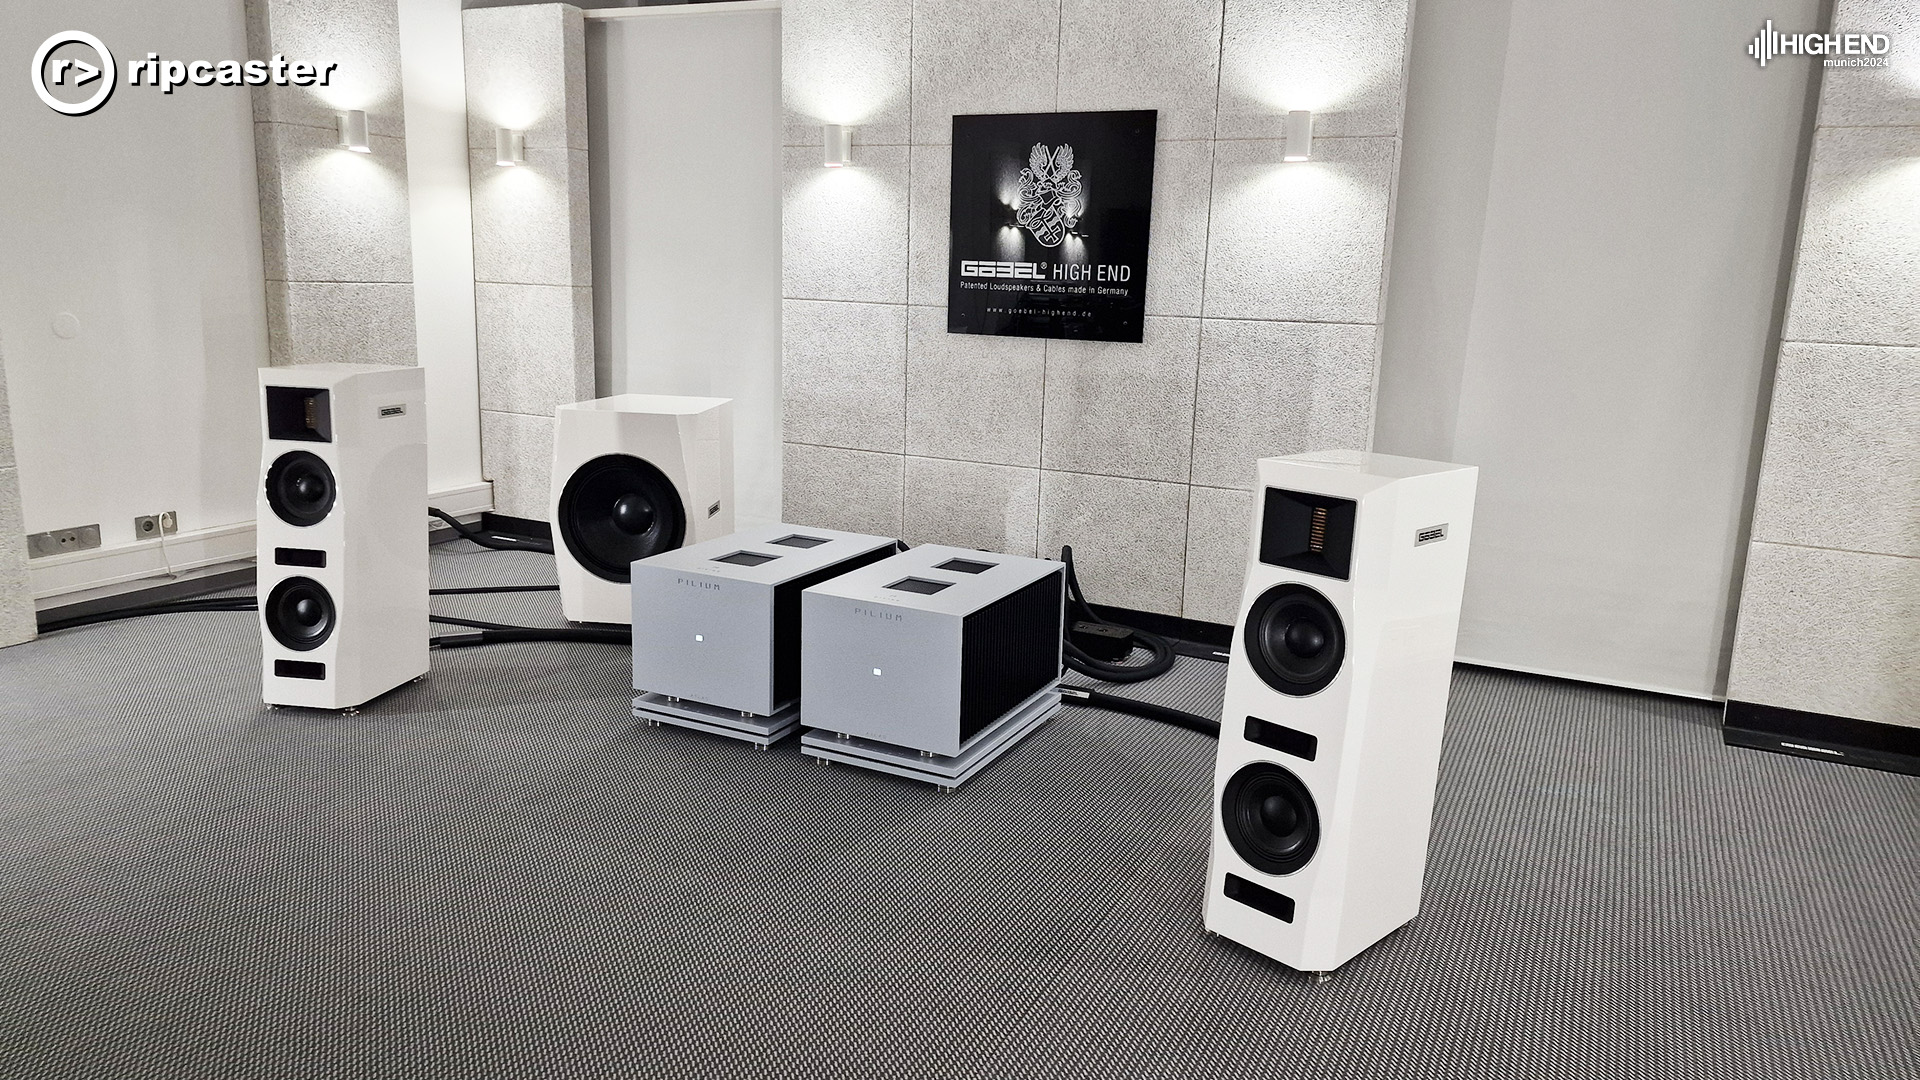 All white and grey.  A pair of floorstanding speakers either side of some grey and black HiFi units.